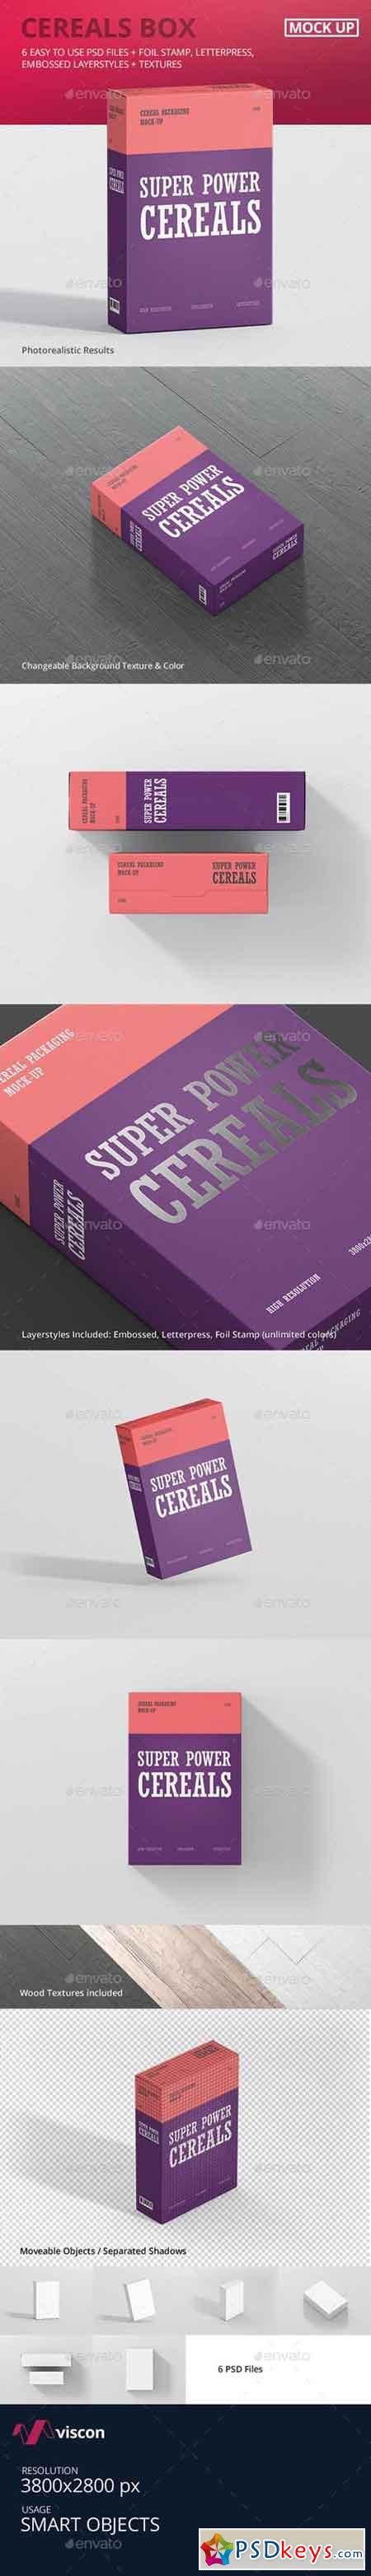 Download Box Page 12 Free Download Photoshop Vector Stock Image Via Torrent Zippyshare From Psdkeys Com PSD Mockup Templates